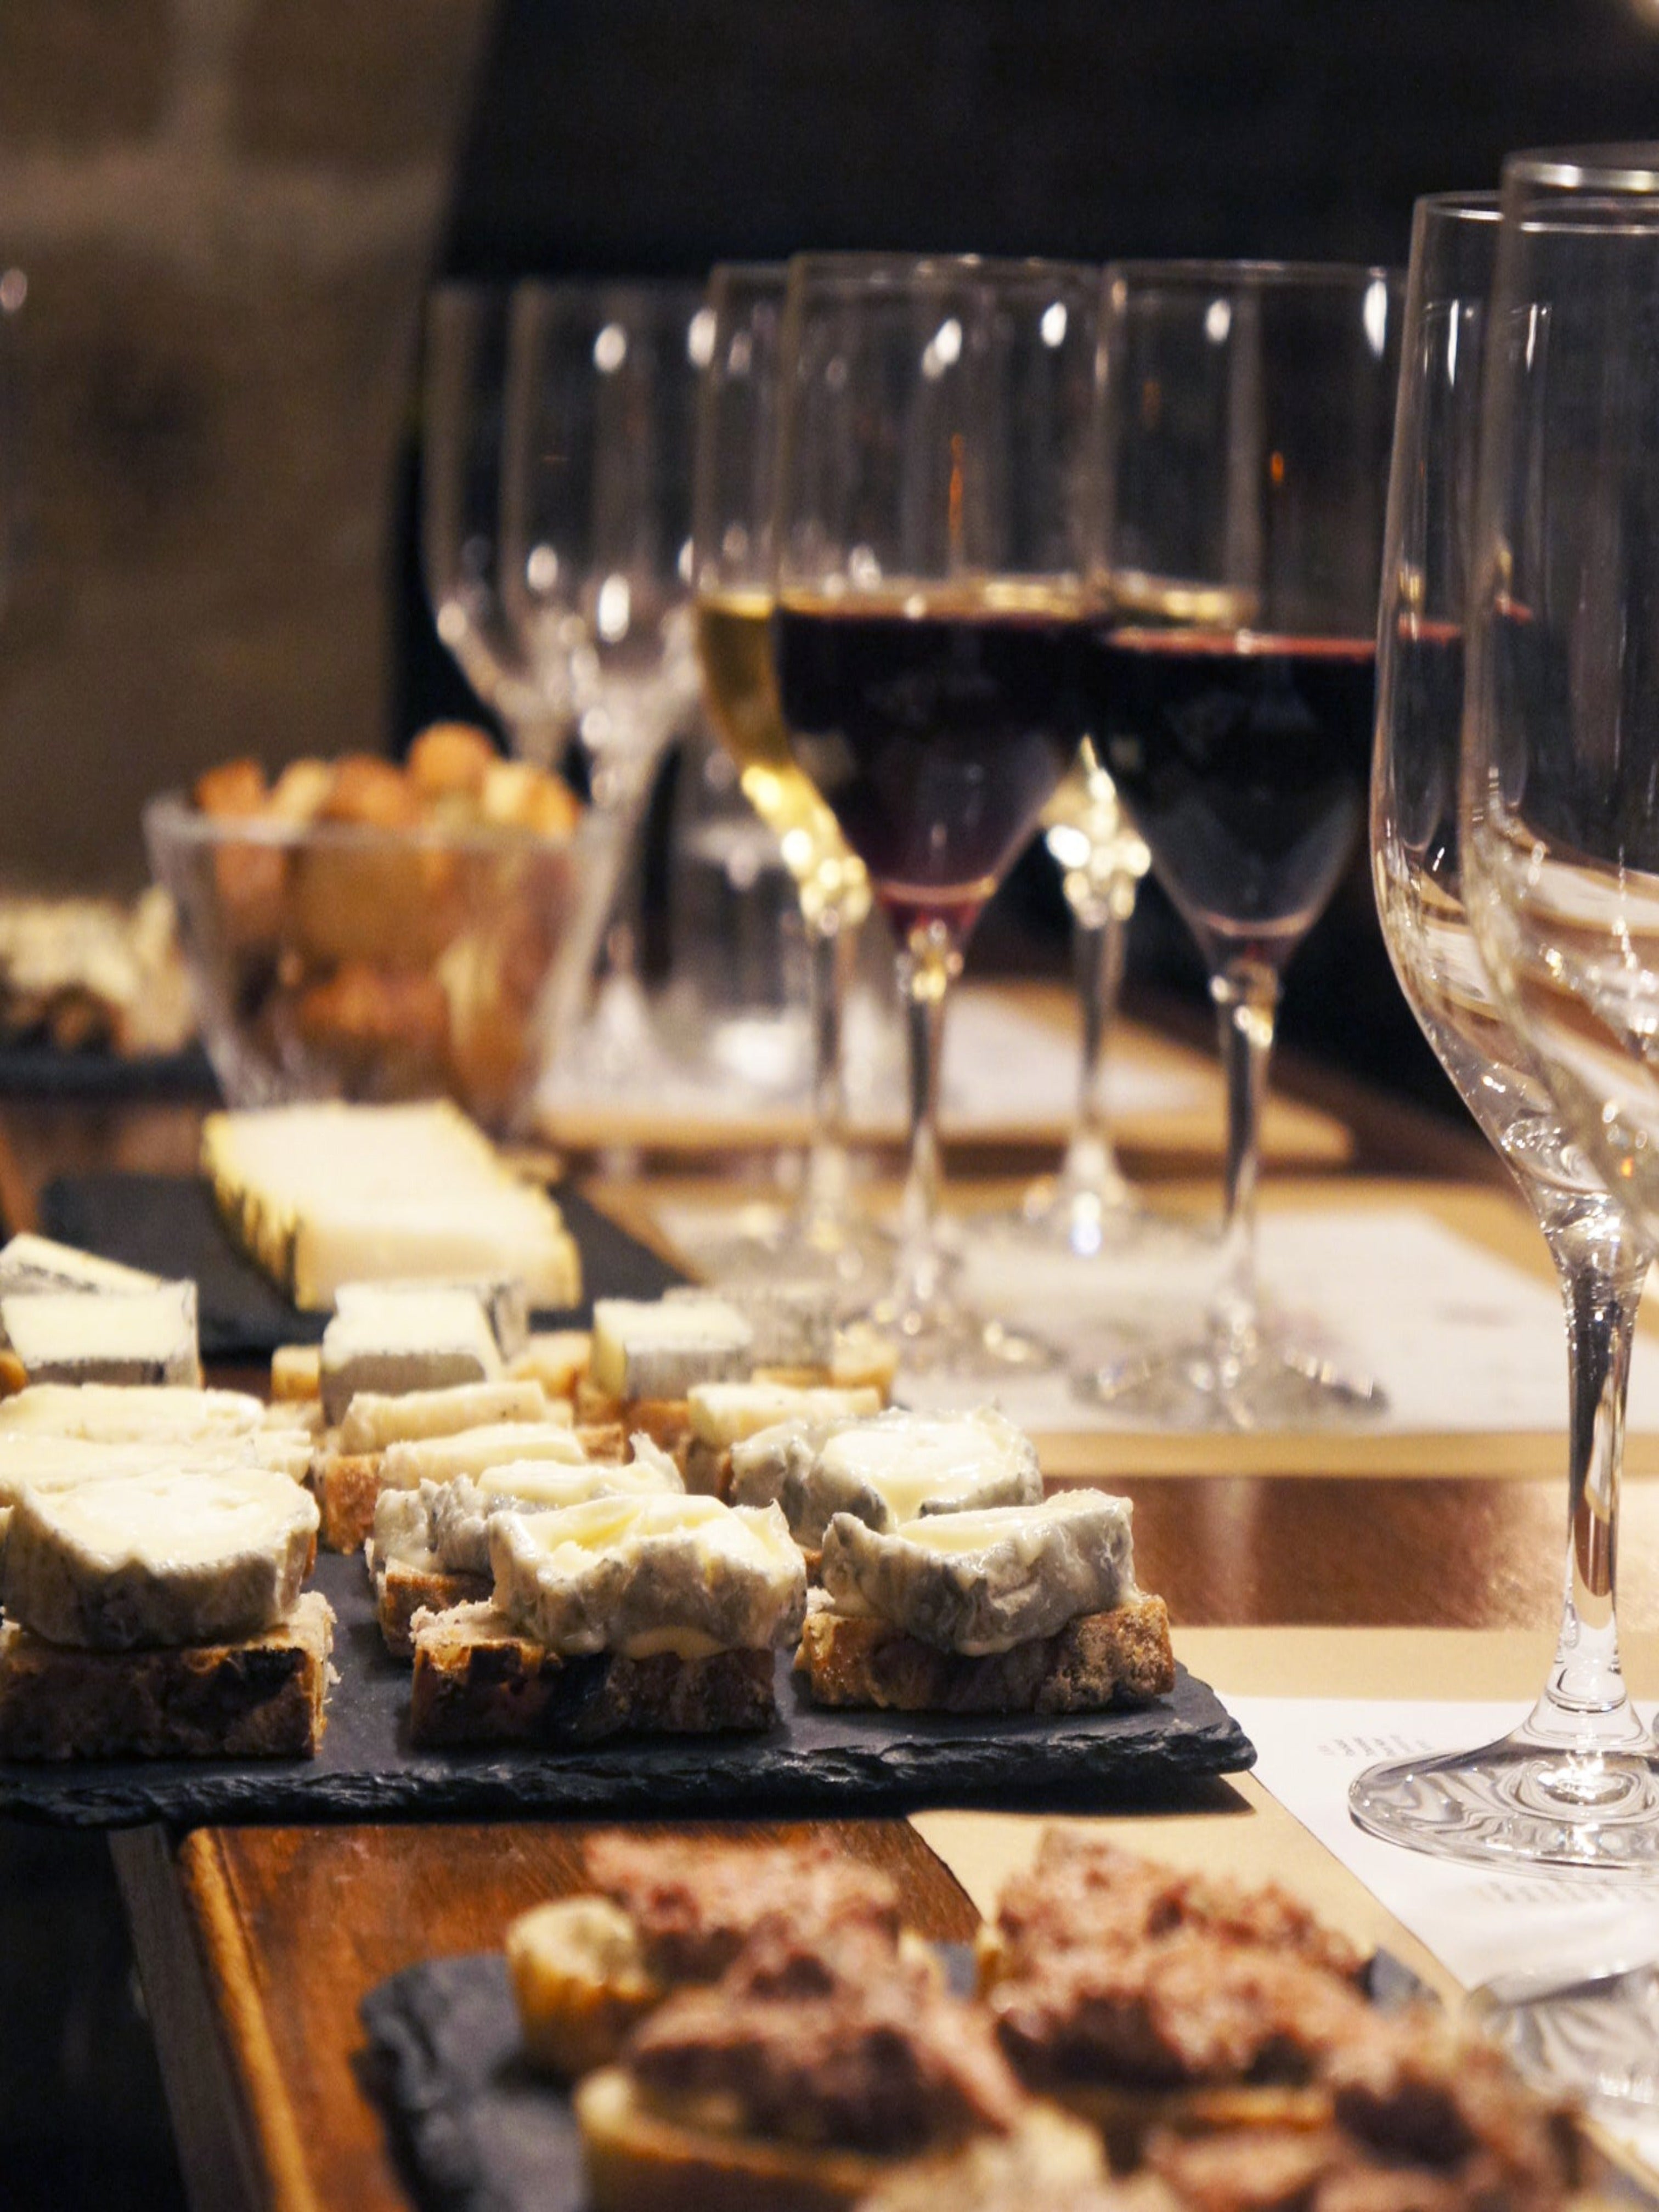 Cours: Vins & Fromages - Terroir (english)